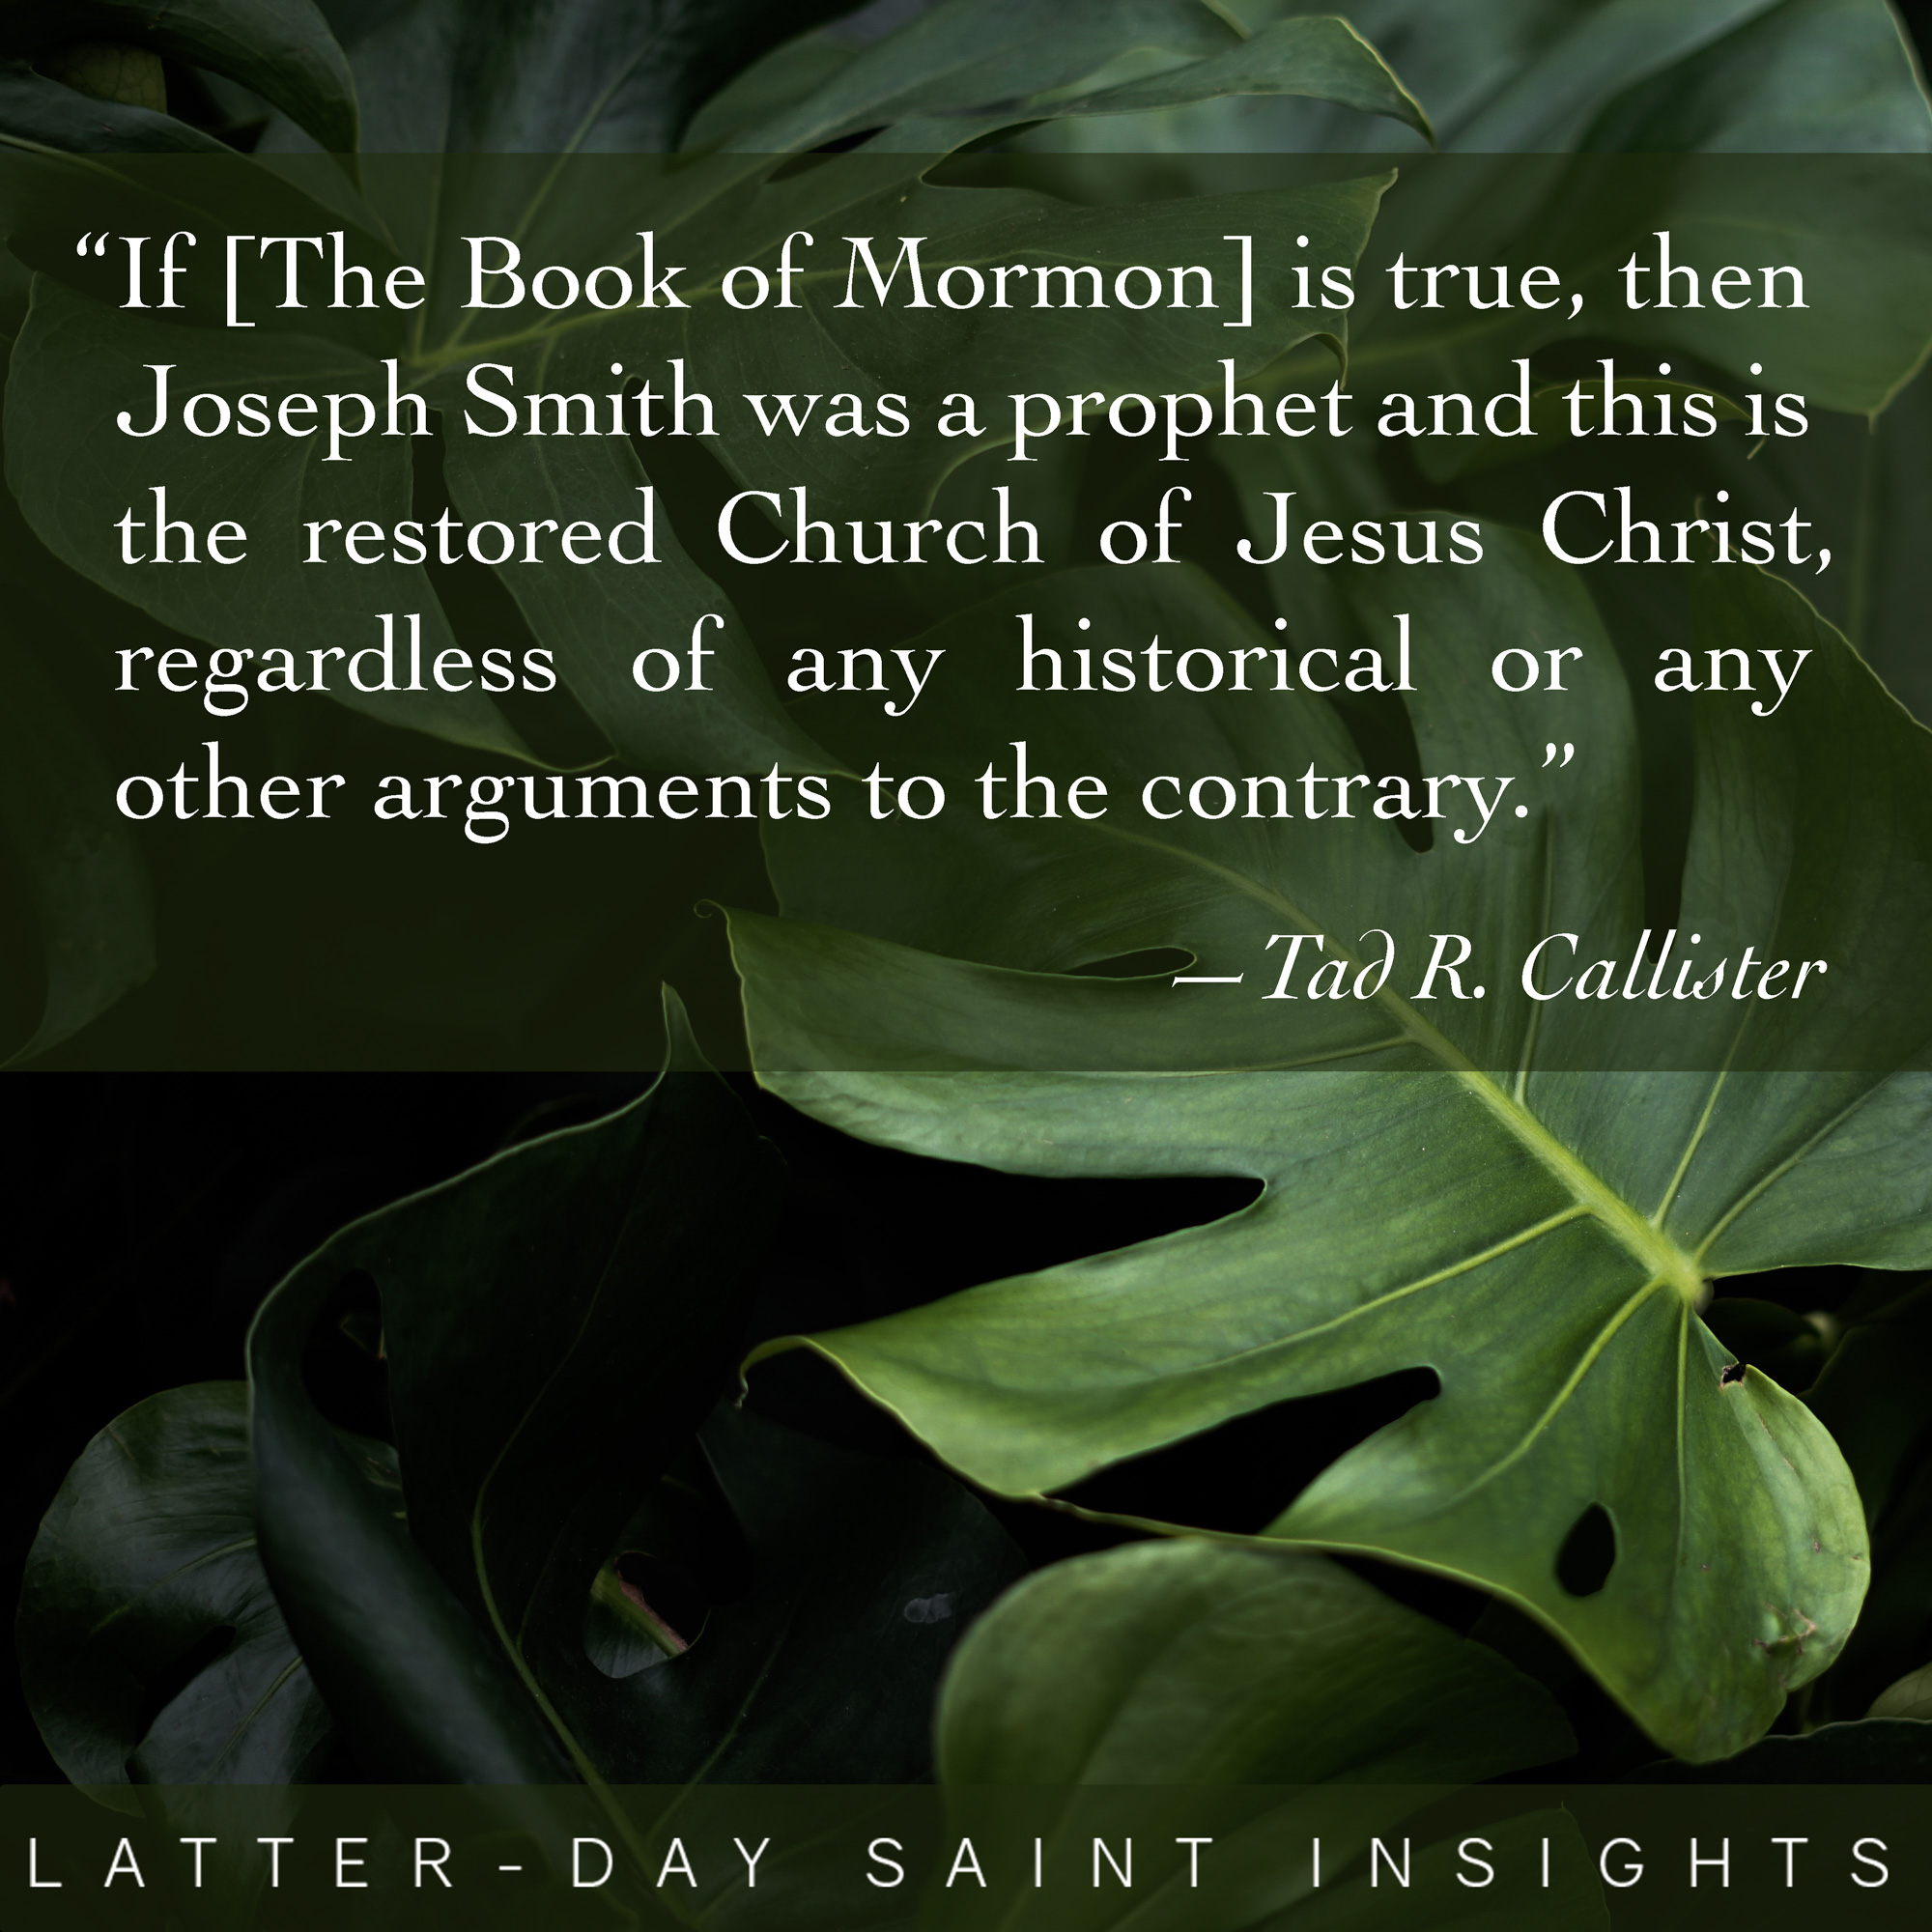 if [The Book of Mormon] is true, then Joseph Smith was a prophet and this is the restored Church of Jesus Christ, regardless of any historical or any other arguments to the contrary - Tad R. Callister